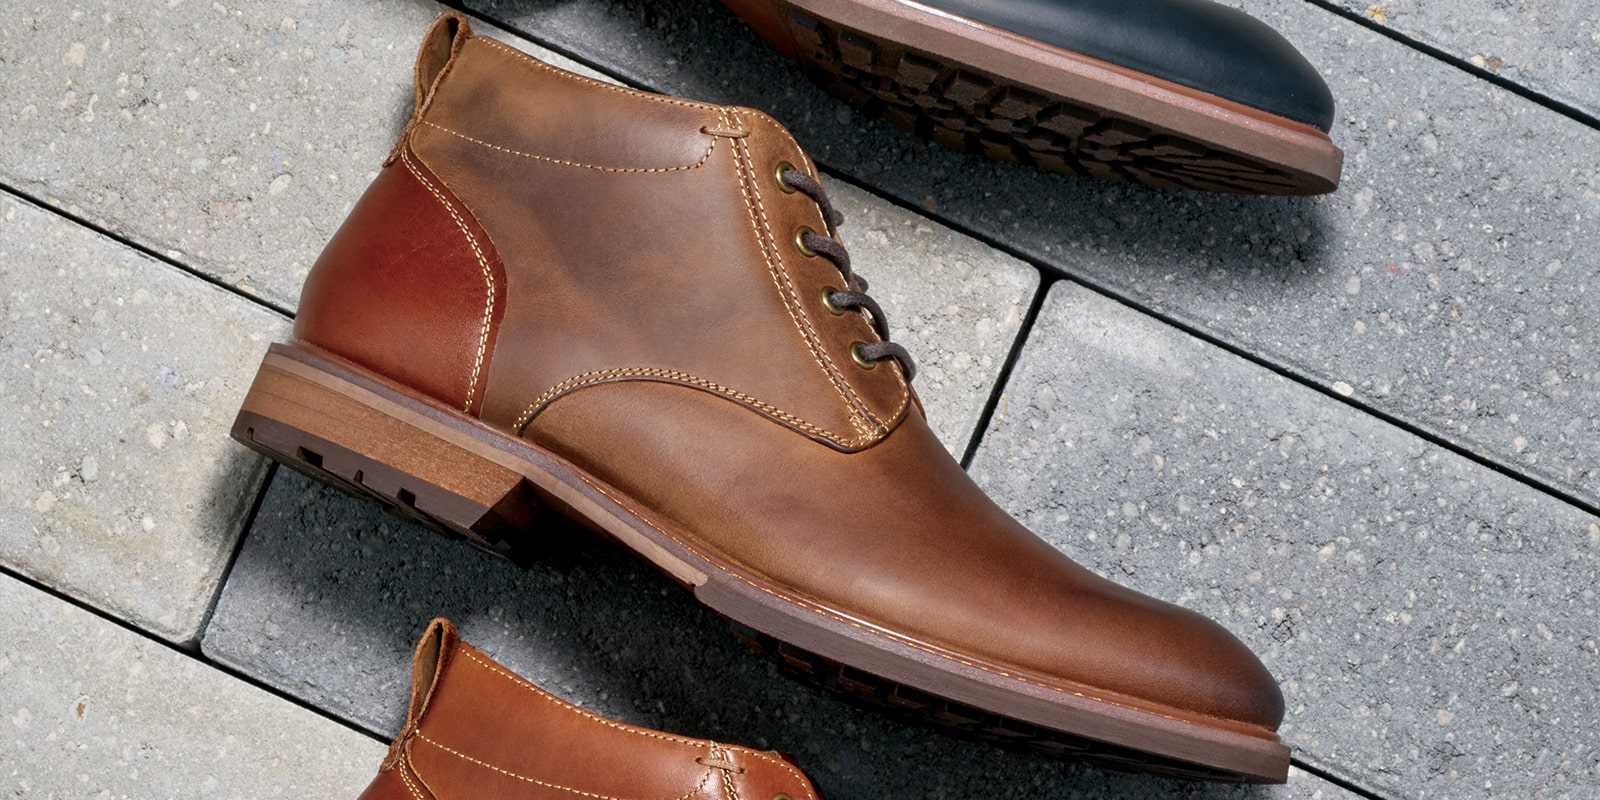 Men's Boots Throughout The Years | Style Guide